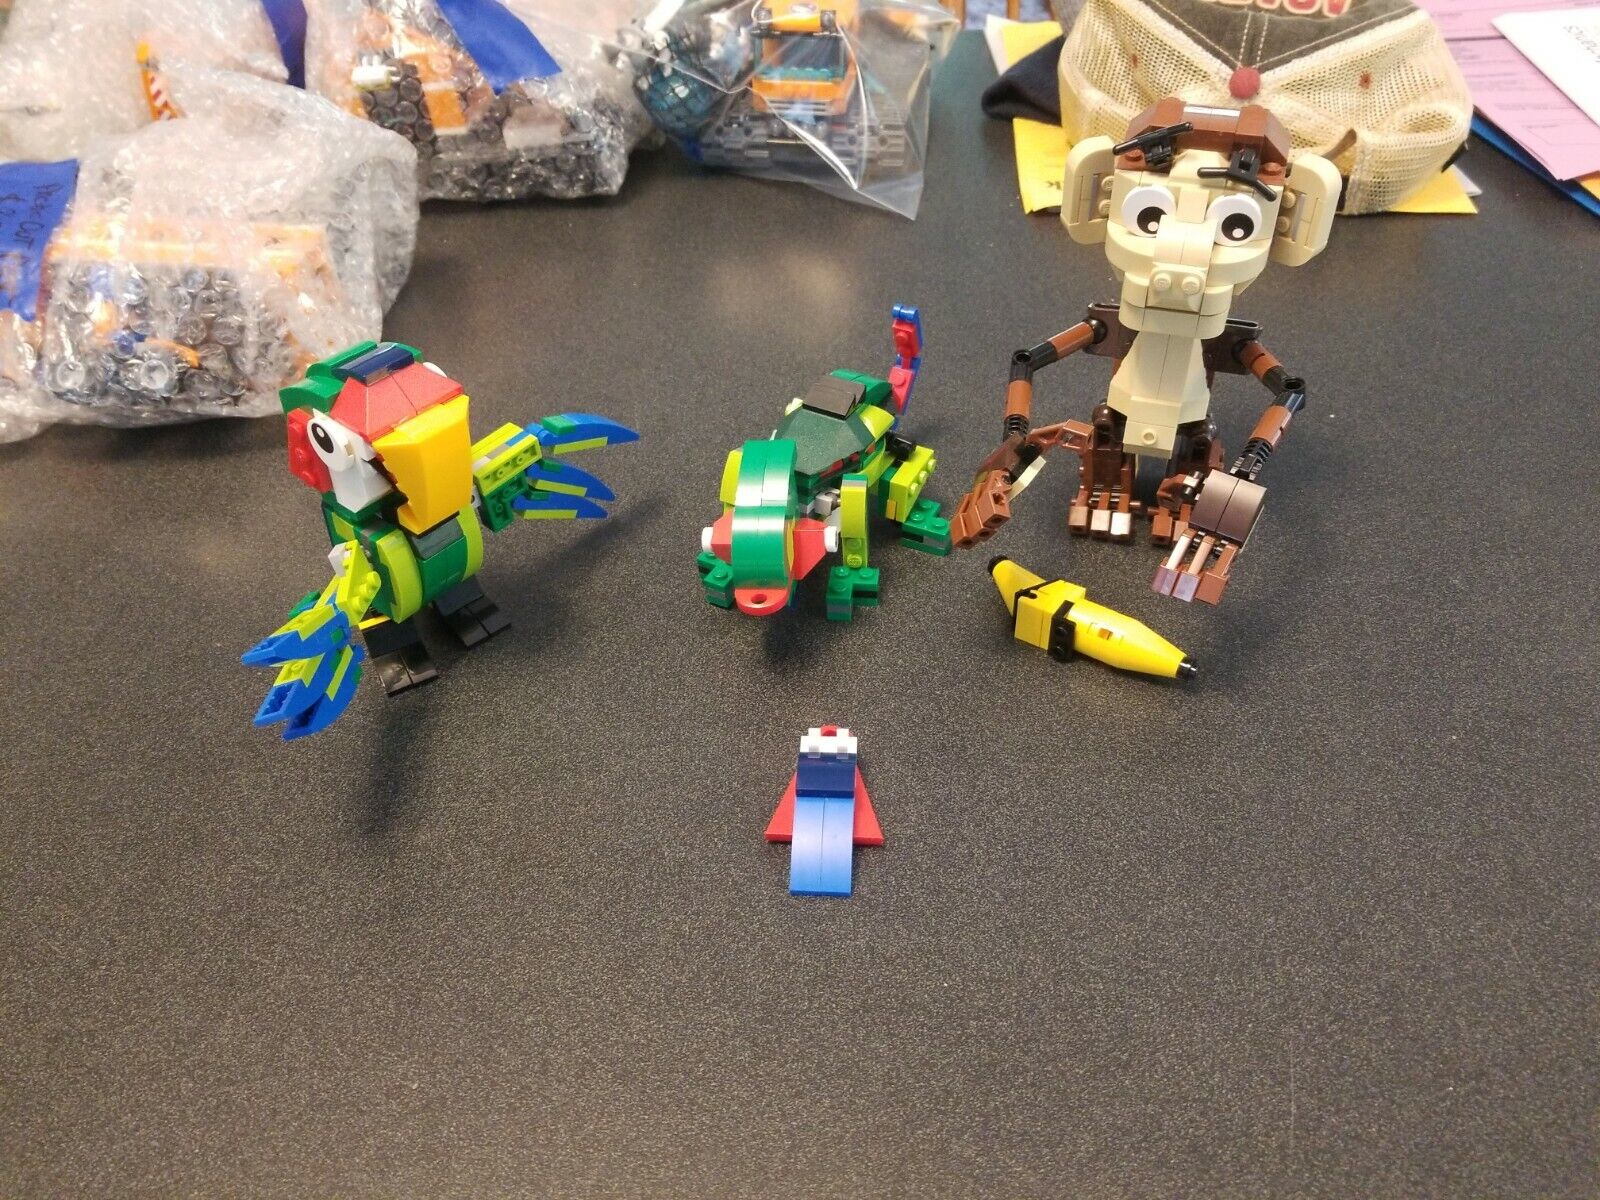 Retired Lego set of 3 animals Parrot, Lizard, Monkey. 31031 and 31019